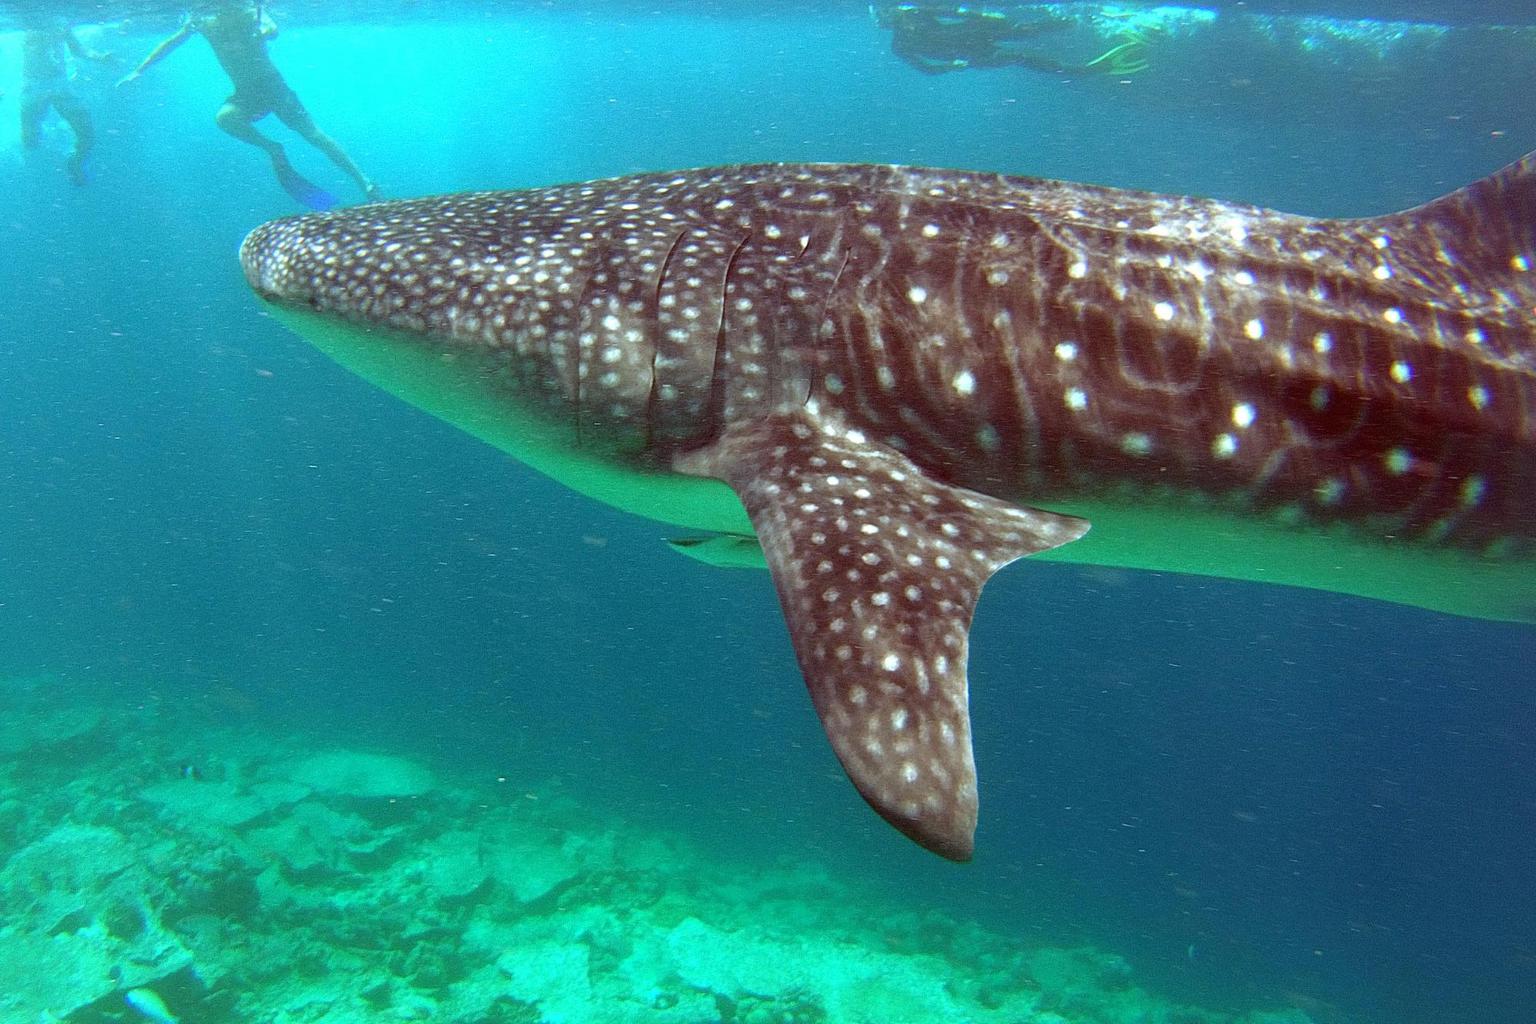 Whale sharks near LUX* Maldives - Photo provided by the LUX* team